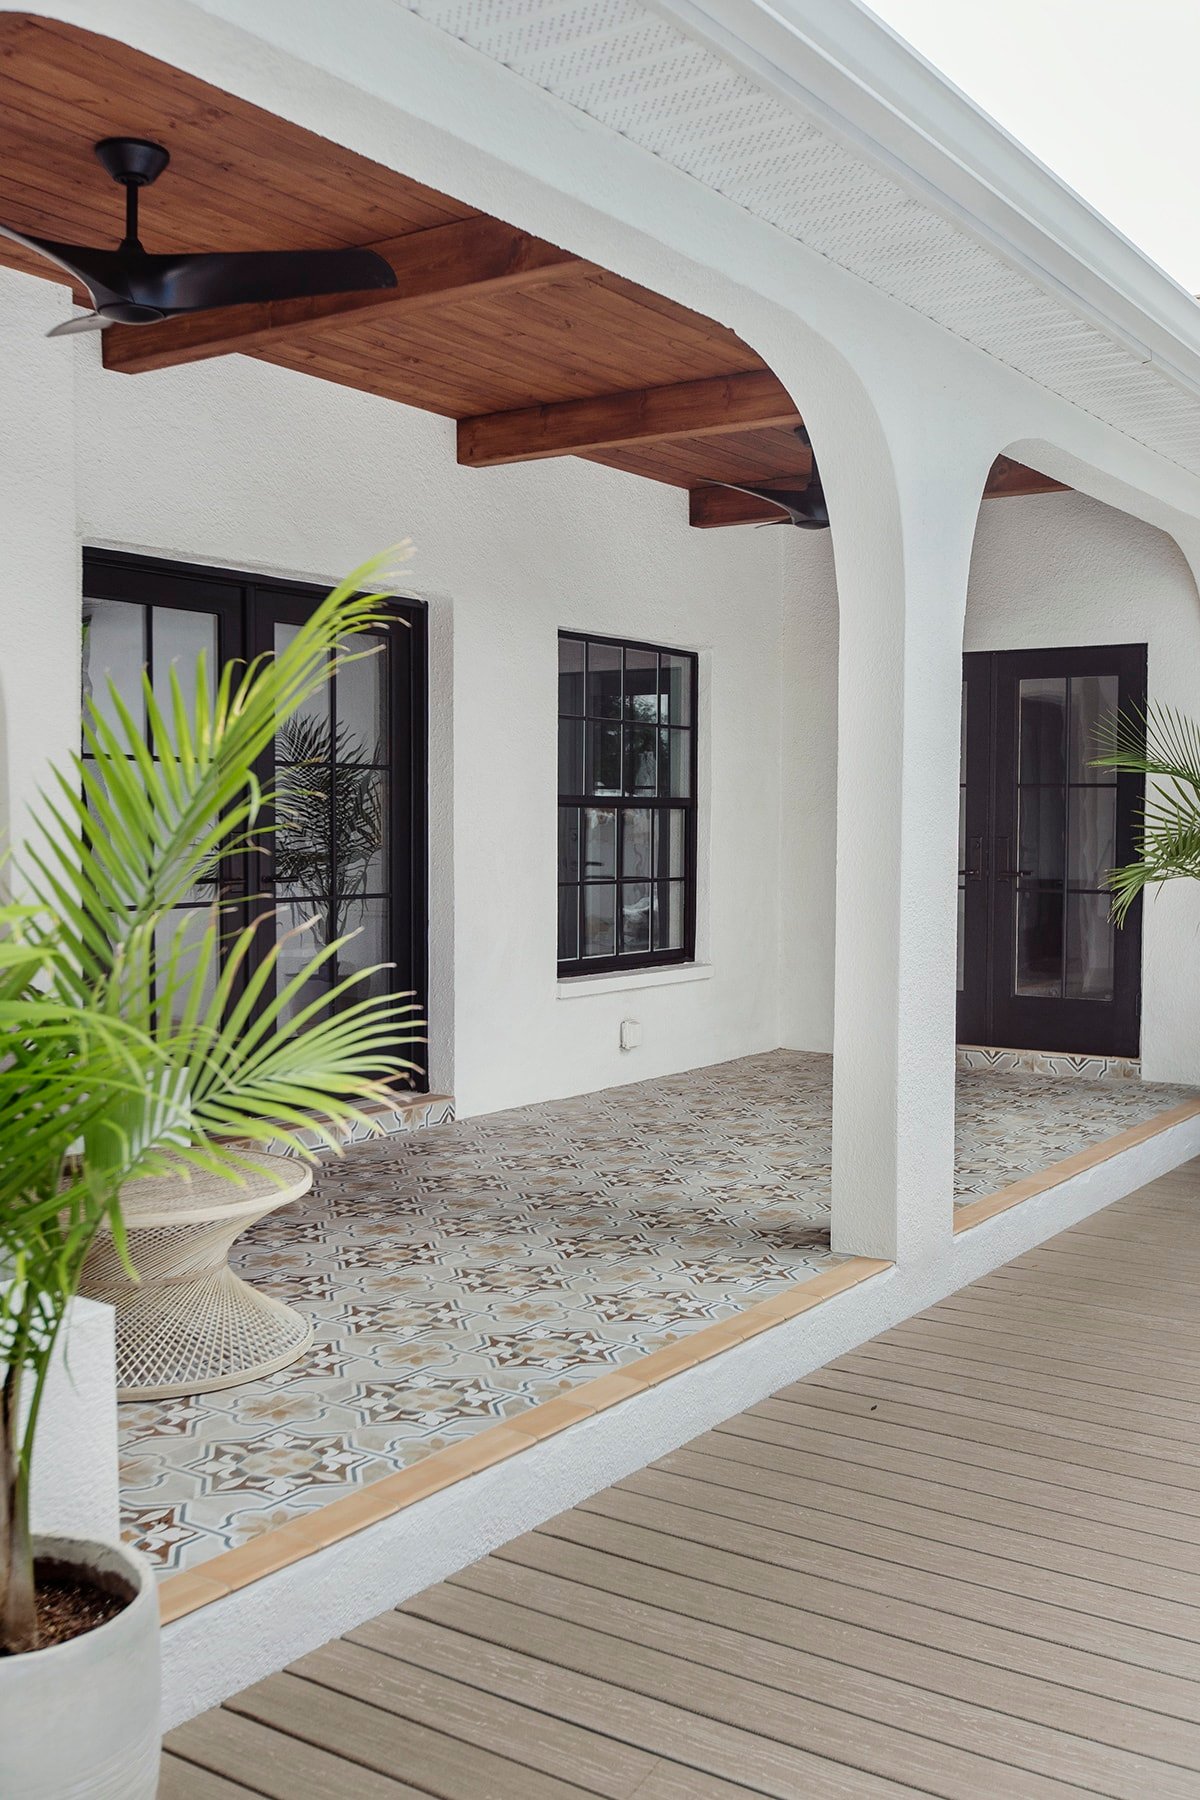 spanish style porch with wood beam ceiling, patterned tile and black french doors, diy arches